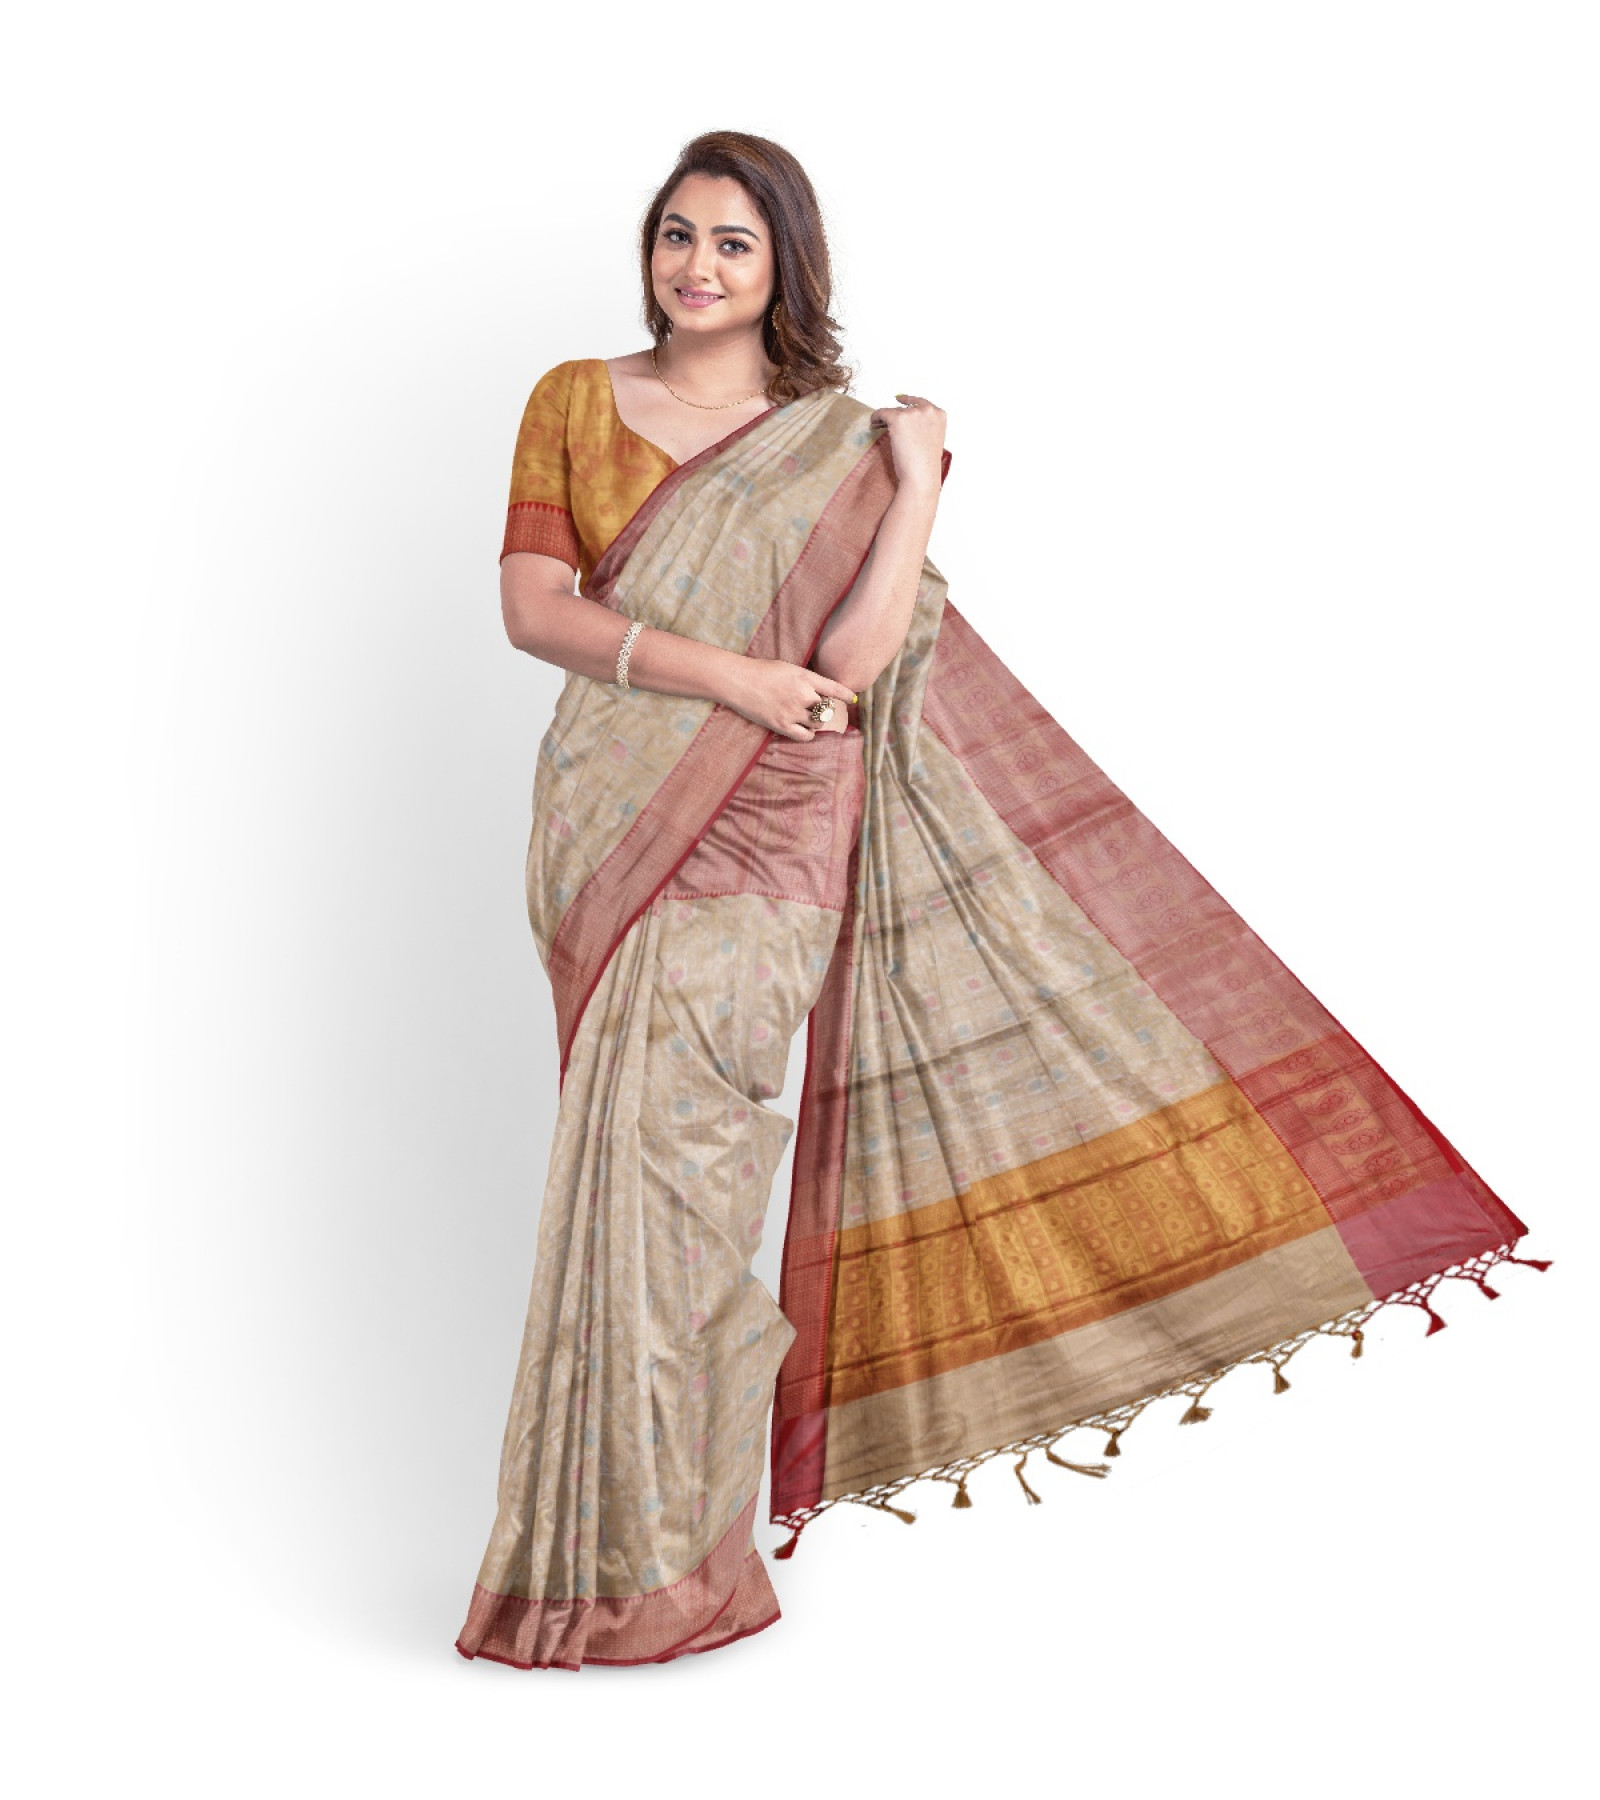 Exclusive Banaras Tissue Silk Saree in the Shades of Peach by Abaranji 